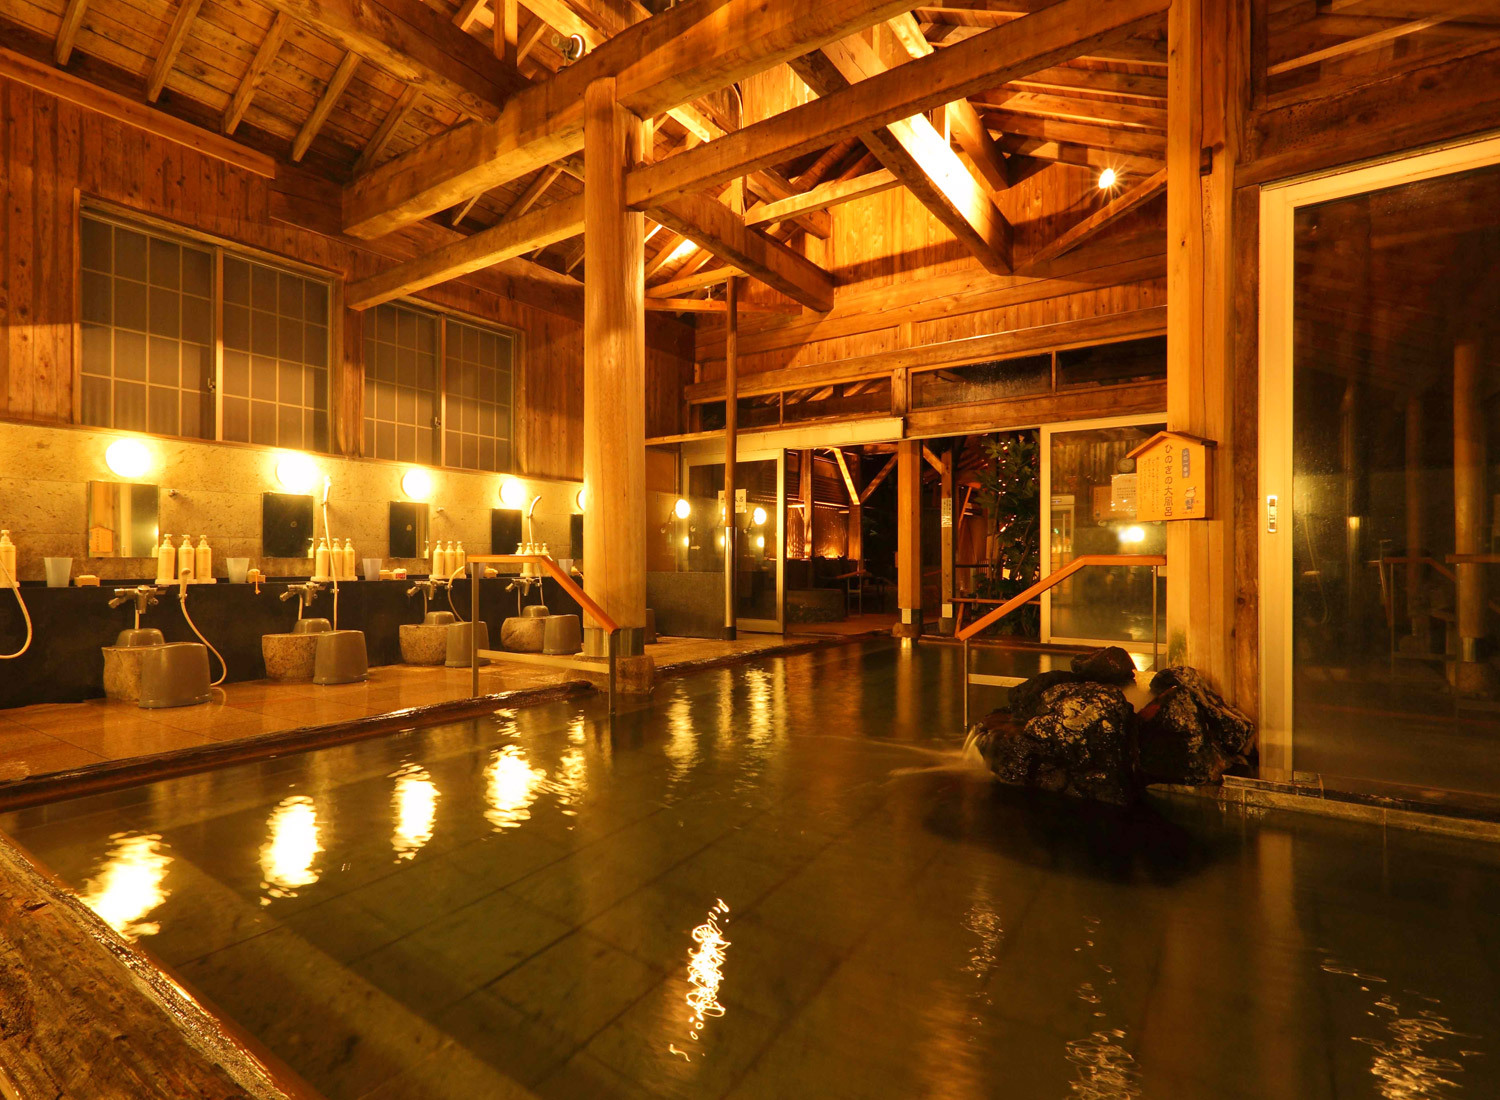 About onsen